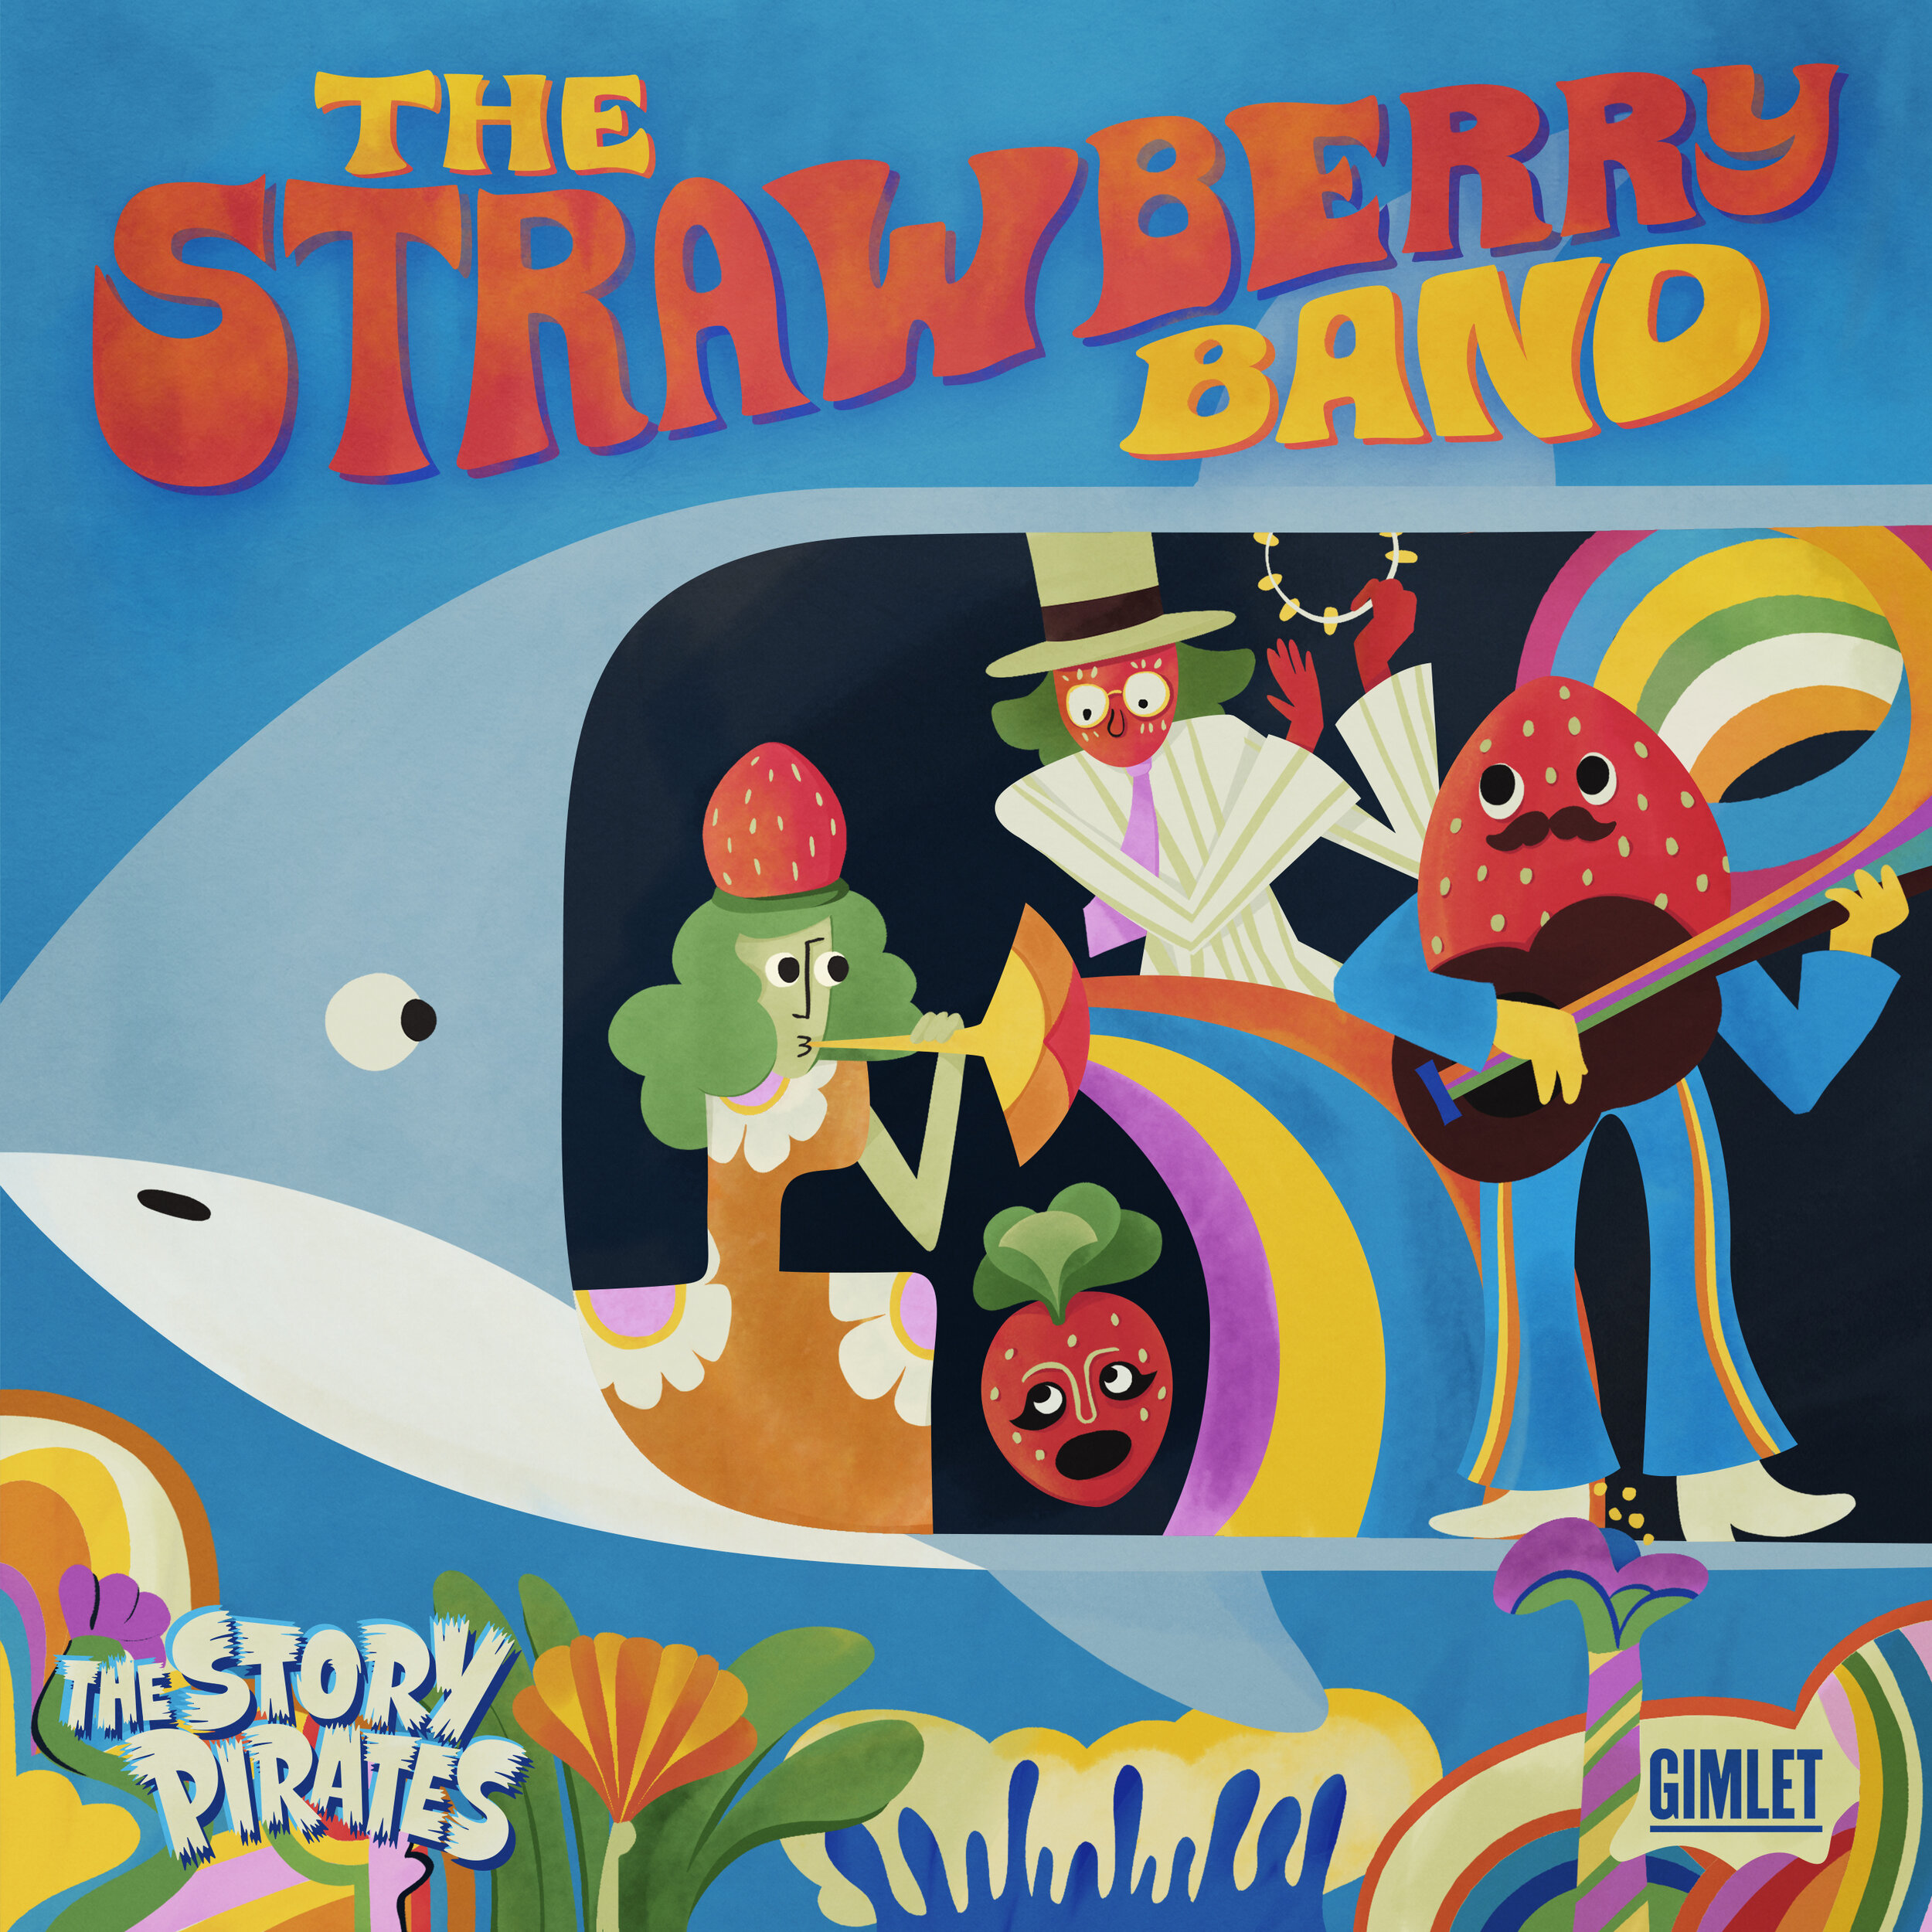 The Strawberry Band